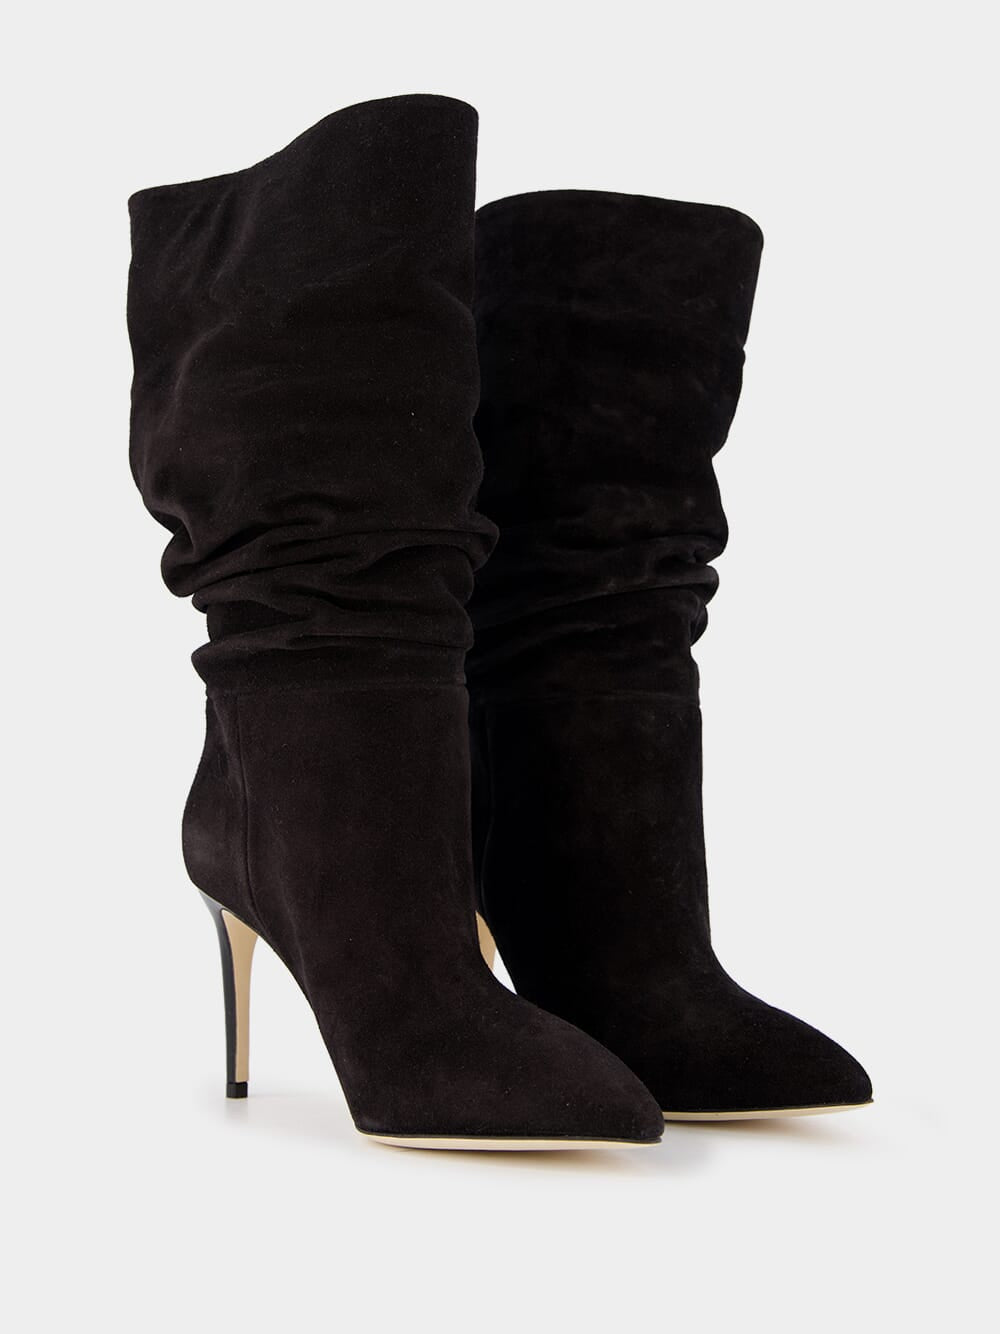 Paris TexasSlouchy Suede 85mm Ankle Boots at Fashion Clinic